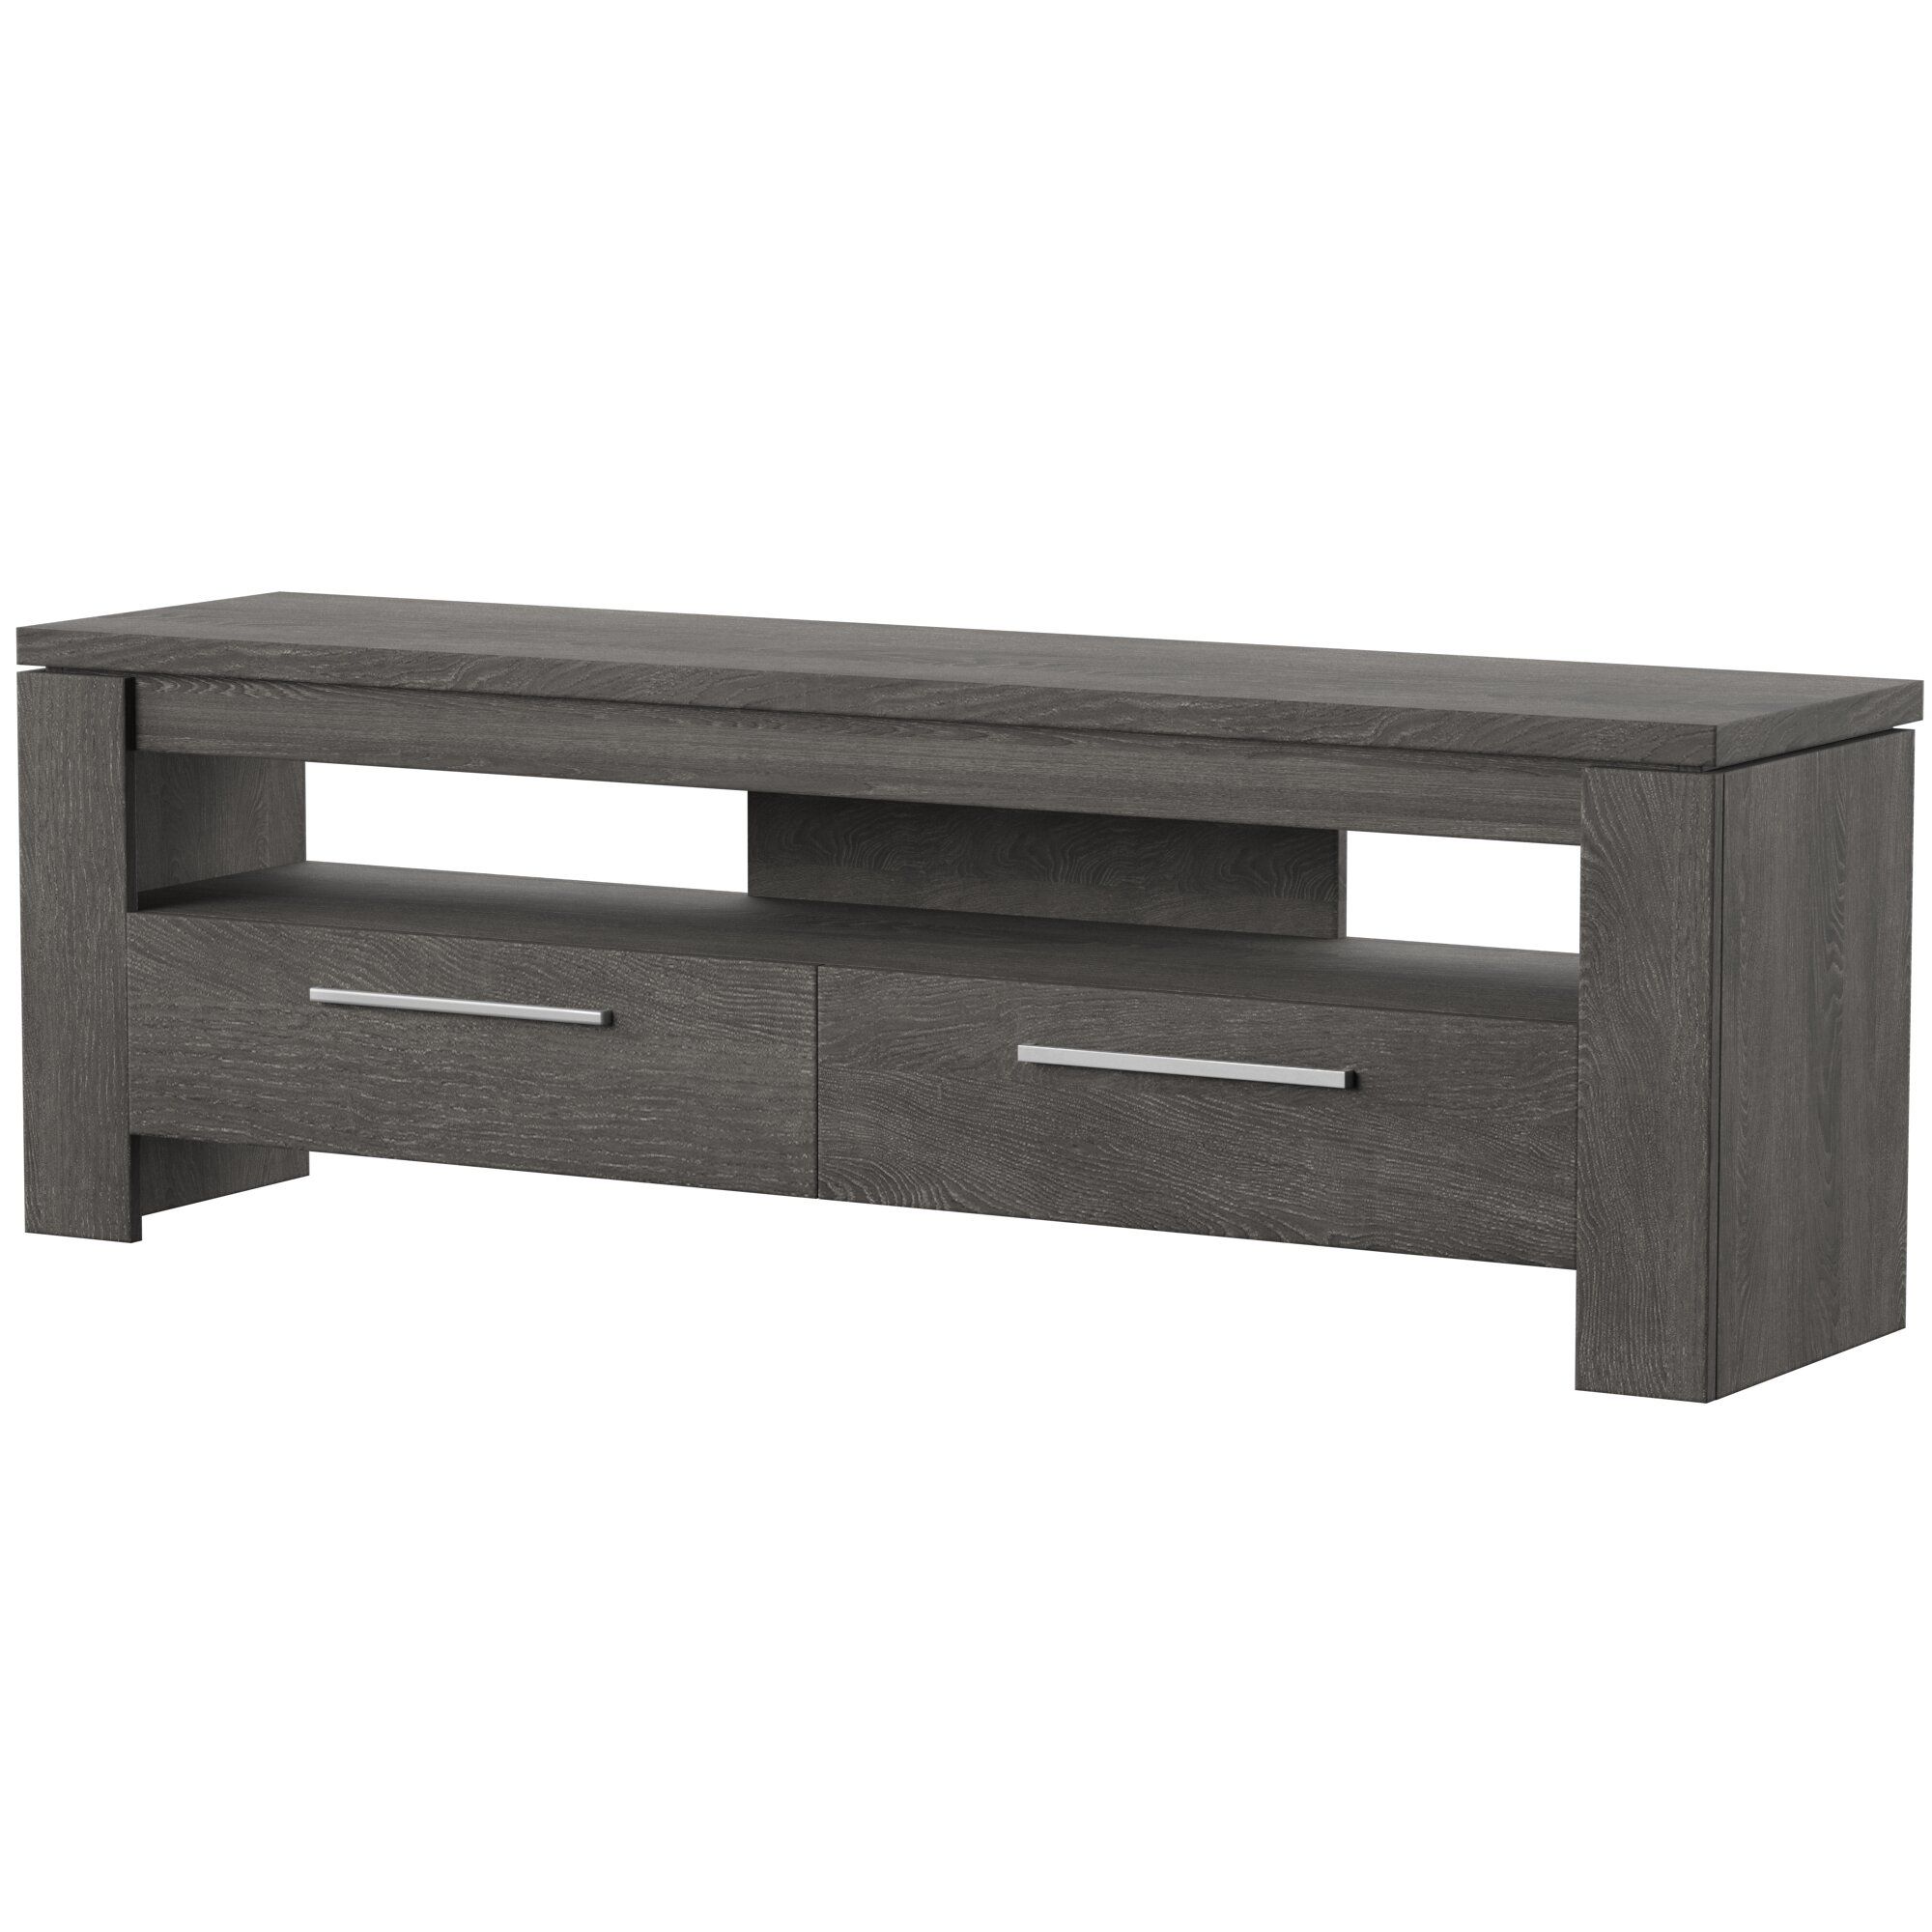 Modern & Contemporary Tv Stand For 65 Inch Tv | Allmodern In Payton Serving Sideboards (View 30 of 30)